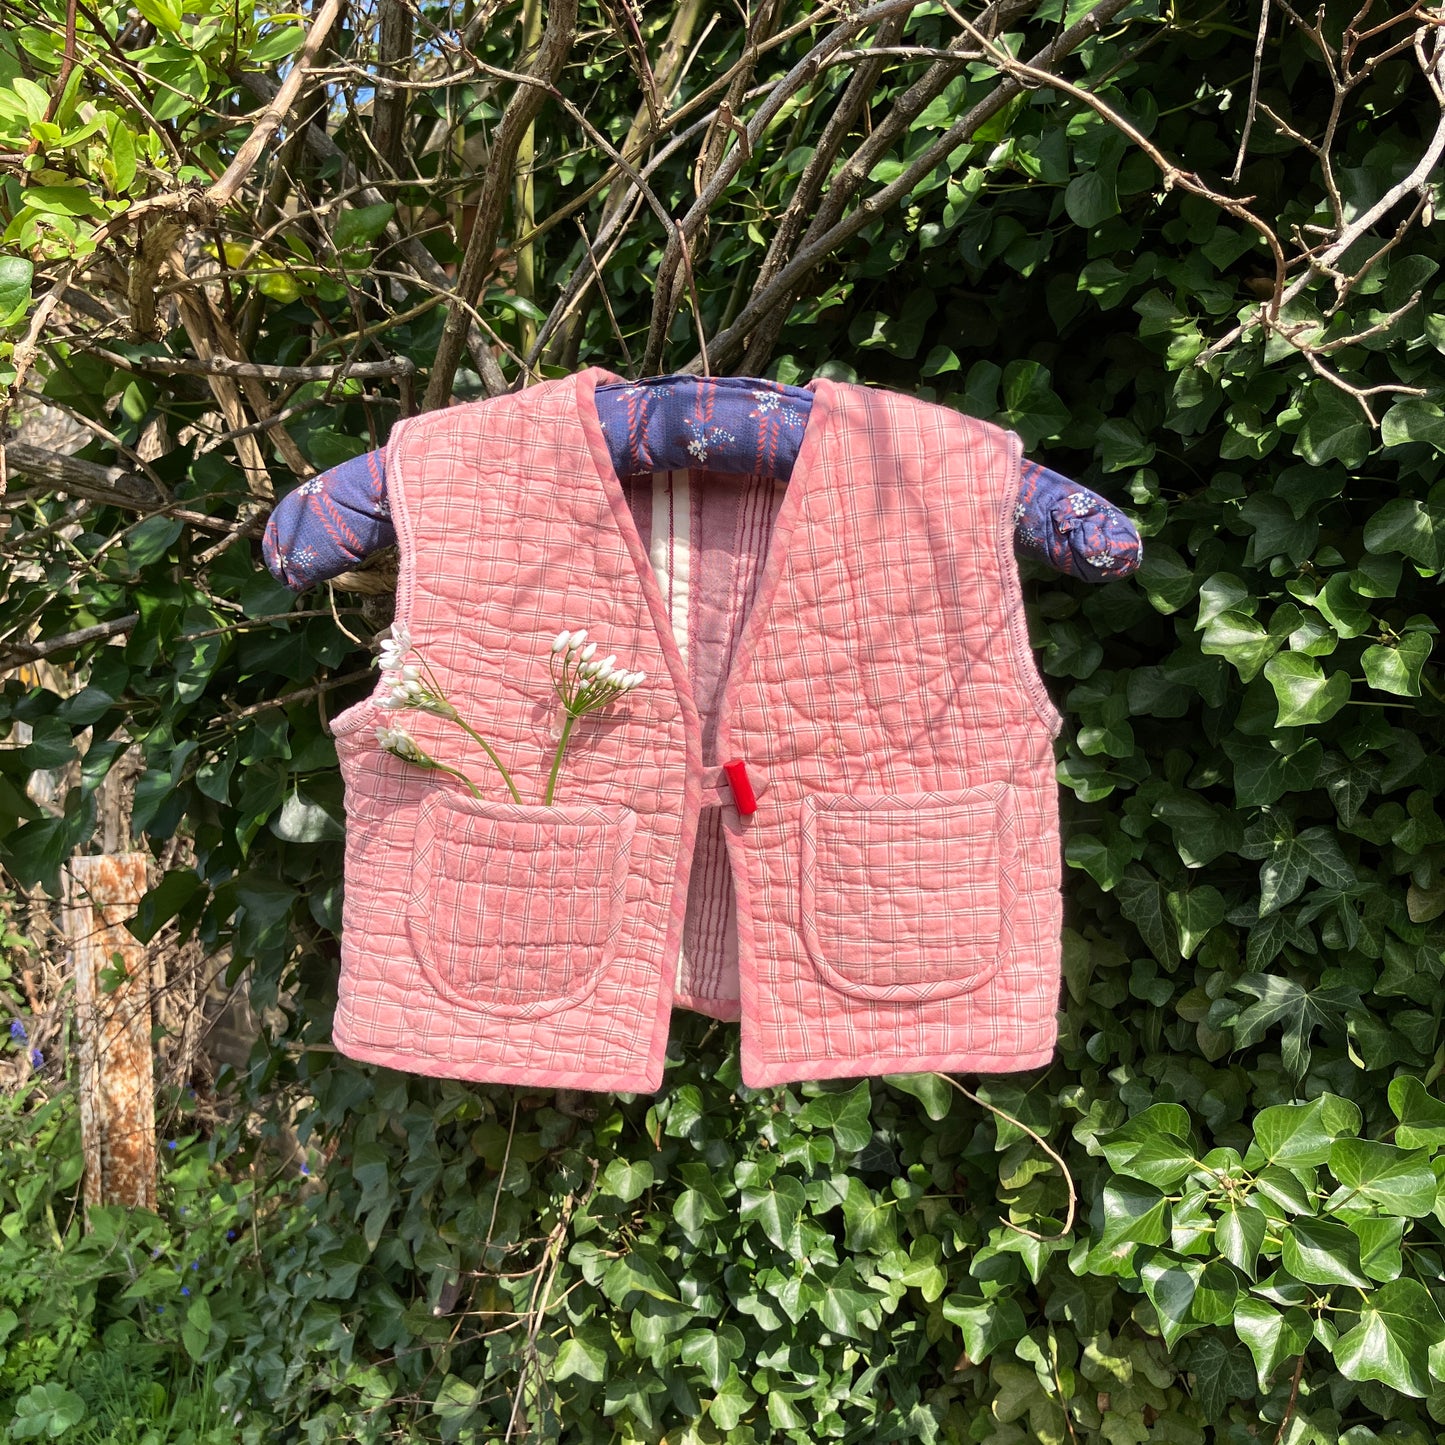 kids vest/gilet/waistcoat made from offcuts of a reclaimed pink quilt. Shown hanging on a blue vintage hanger in some foliage with some wild flowers in one of the pockets